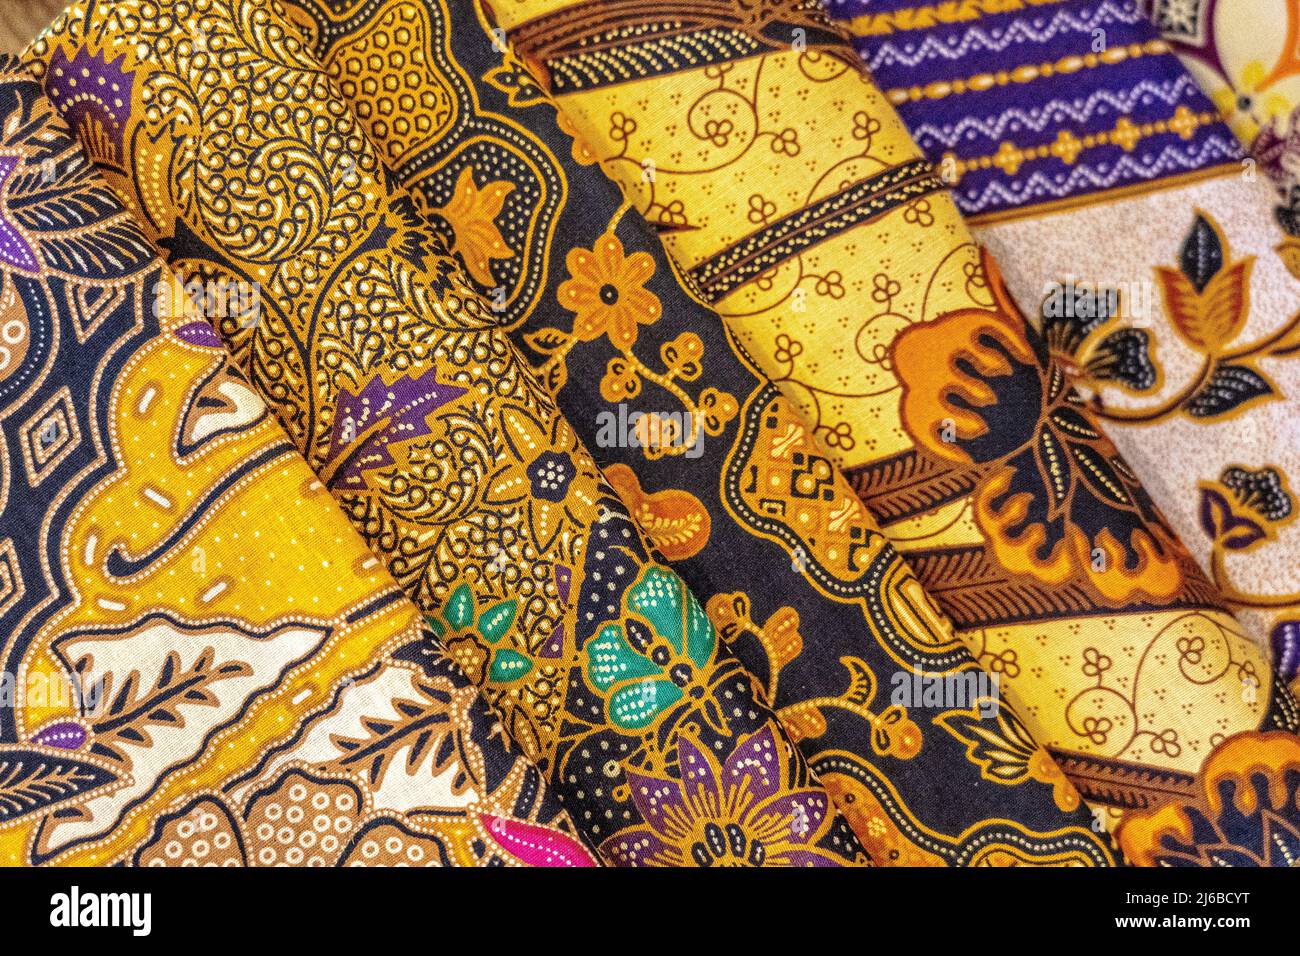 Cheerful and brightly colored batik clothing that is often found in Indonesia. Many tourists take this home as a souvenir Stock Photo